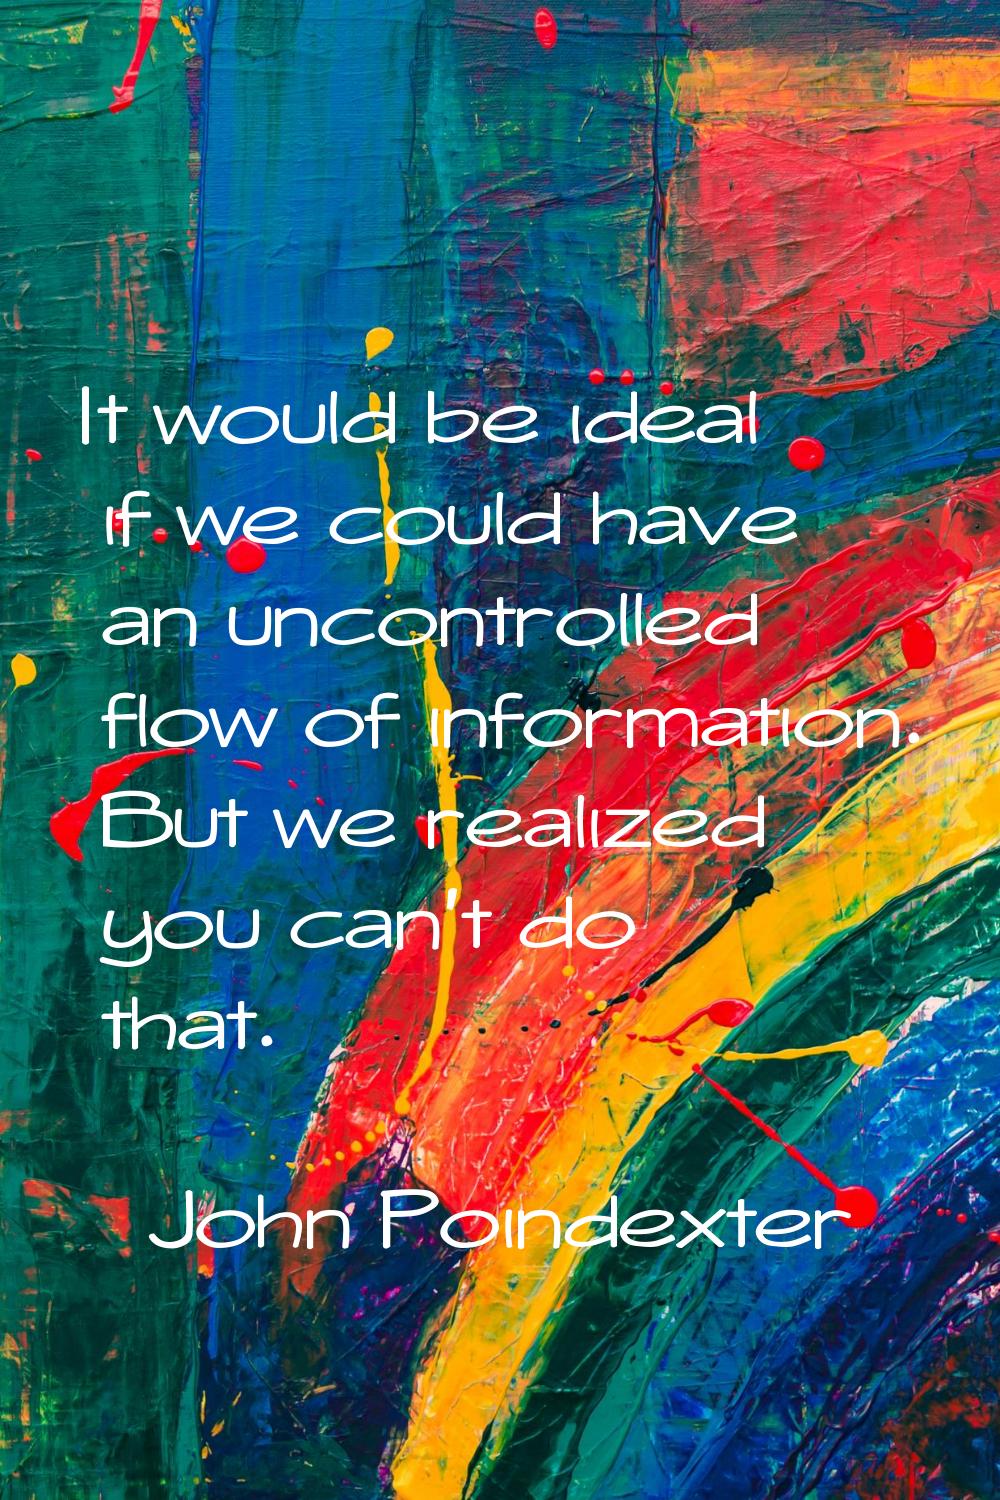 It would be ideal if we could have an uncontrolled flow of information. But we realized you can't d